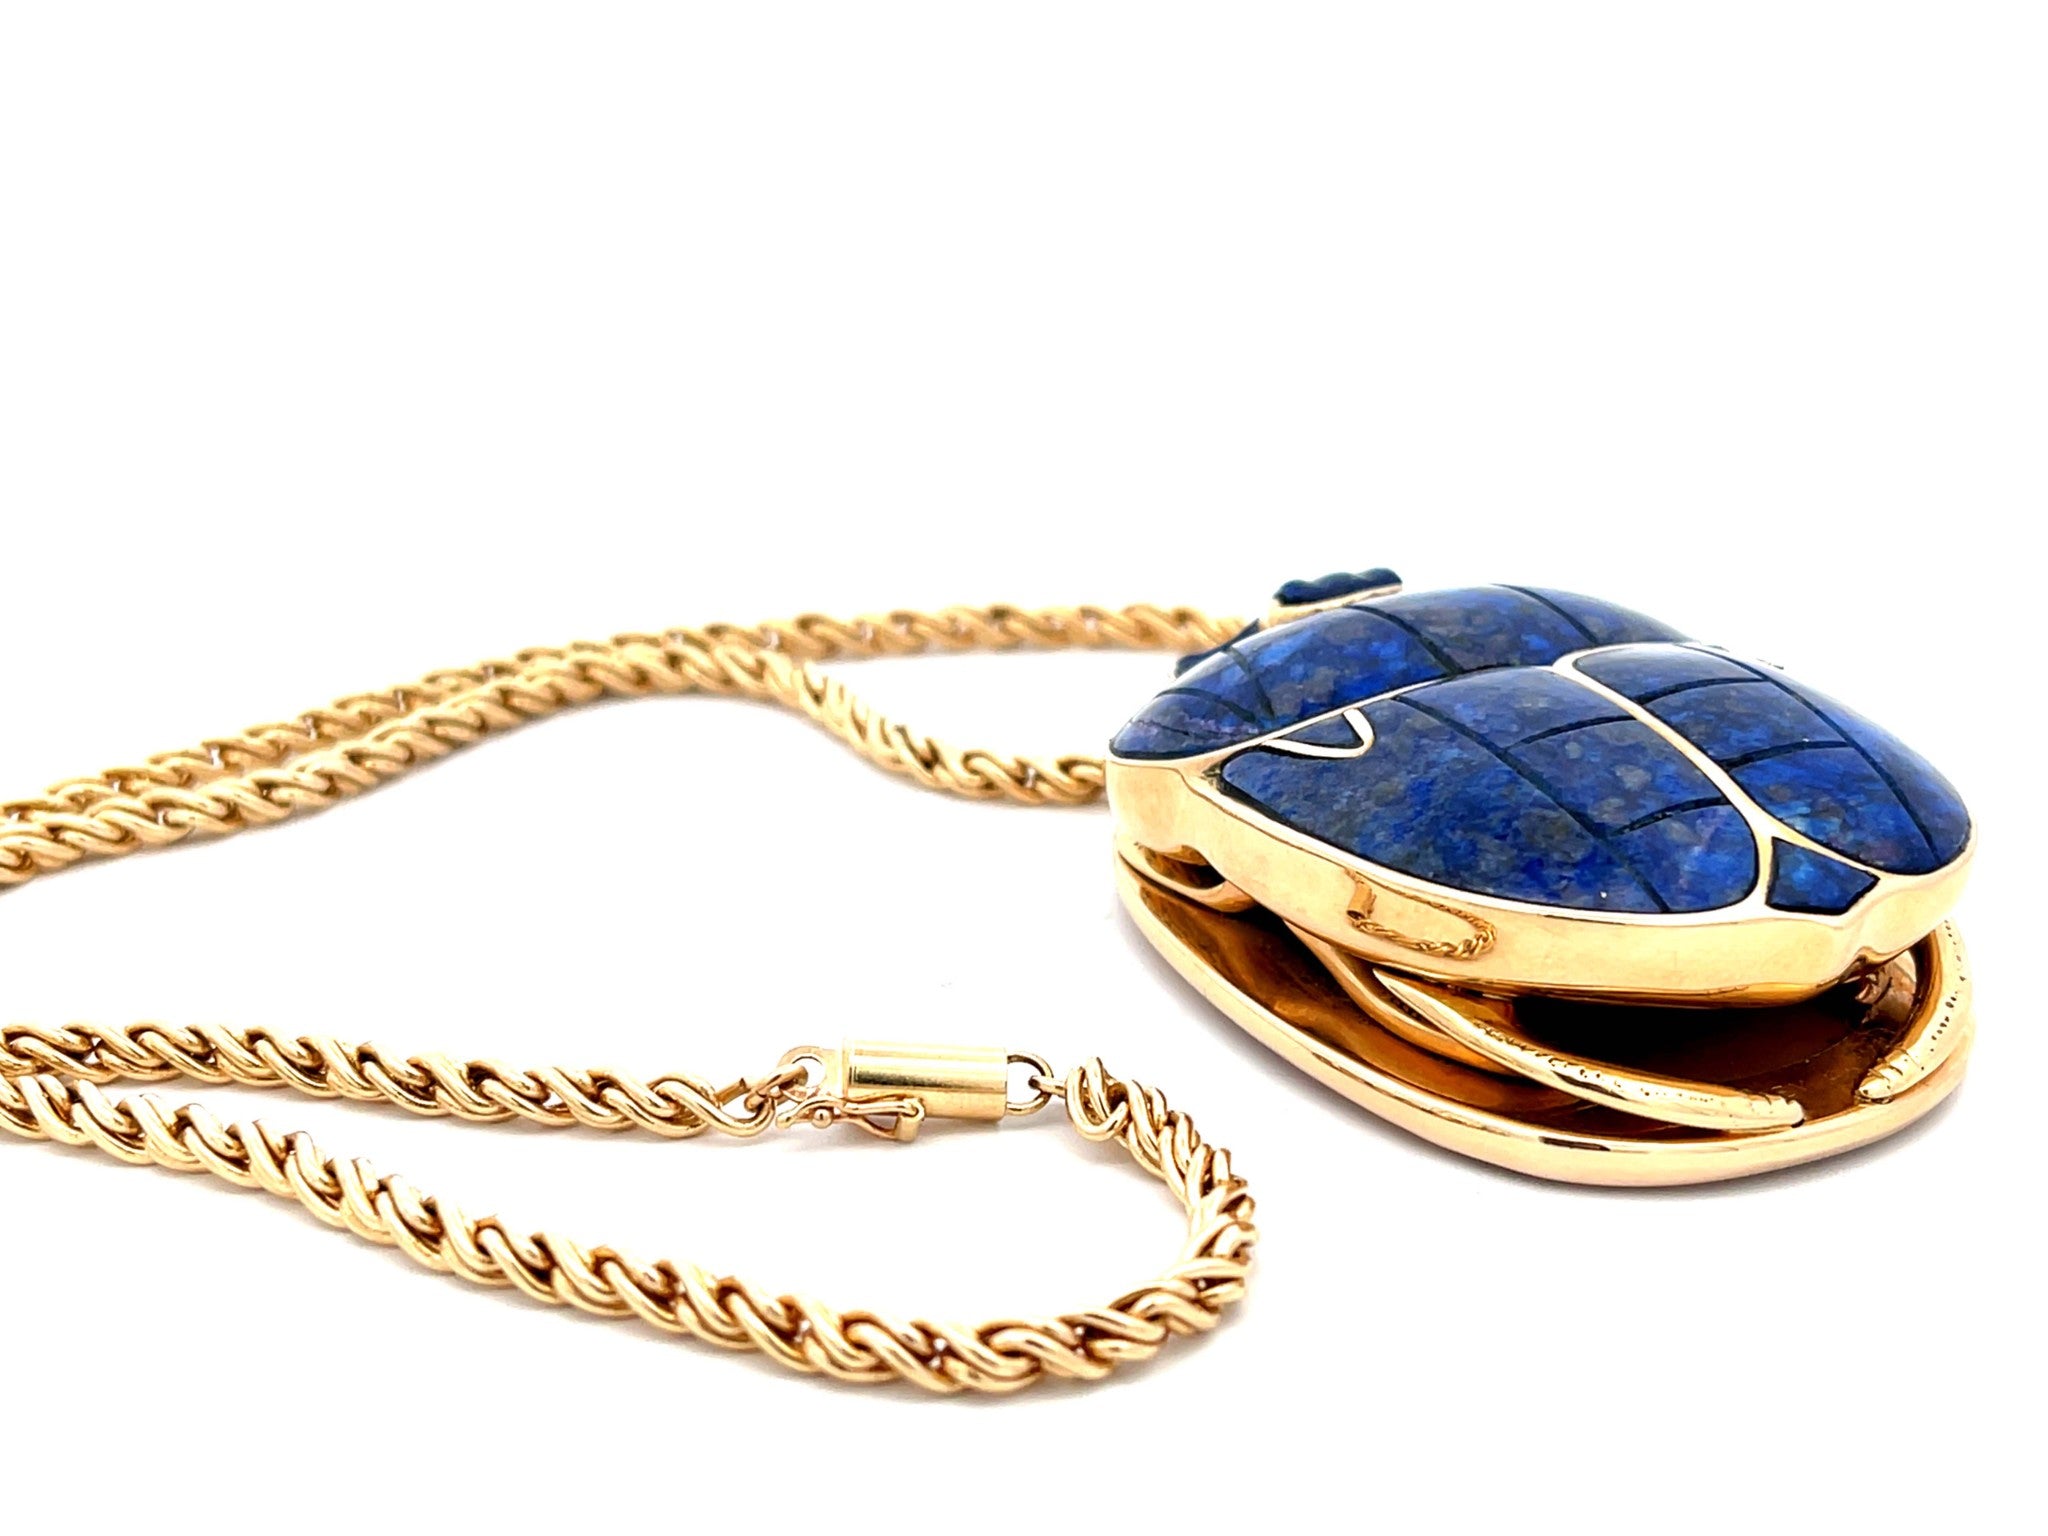 Egyptian Lapis Scarab Beetle Pendant with Woven Chain in 14k Yellow Gold